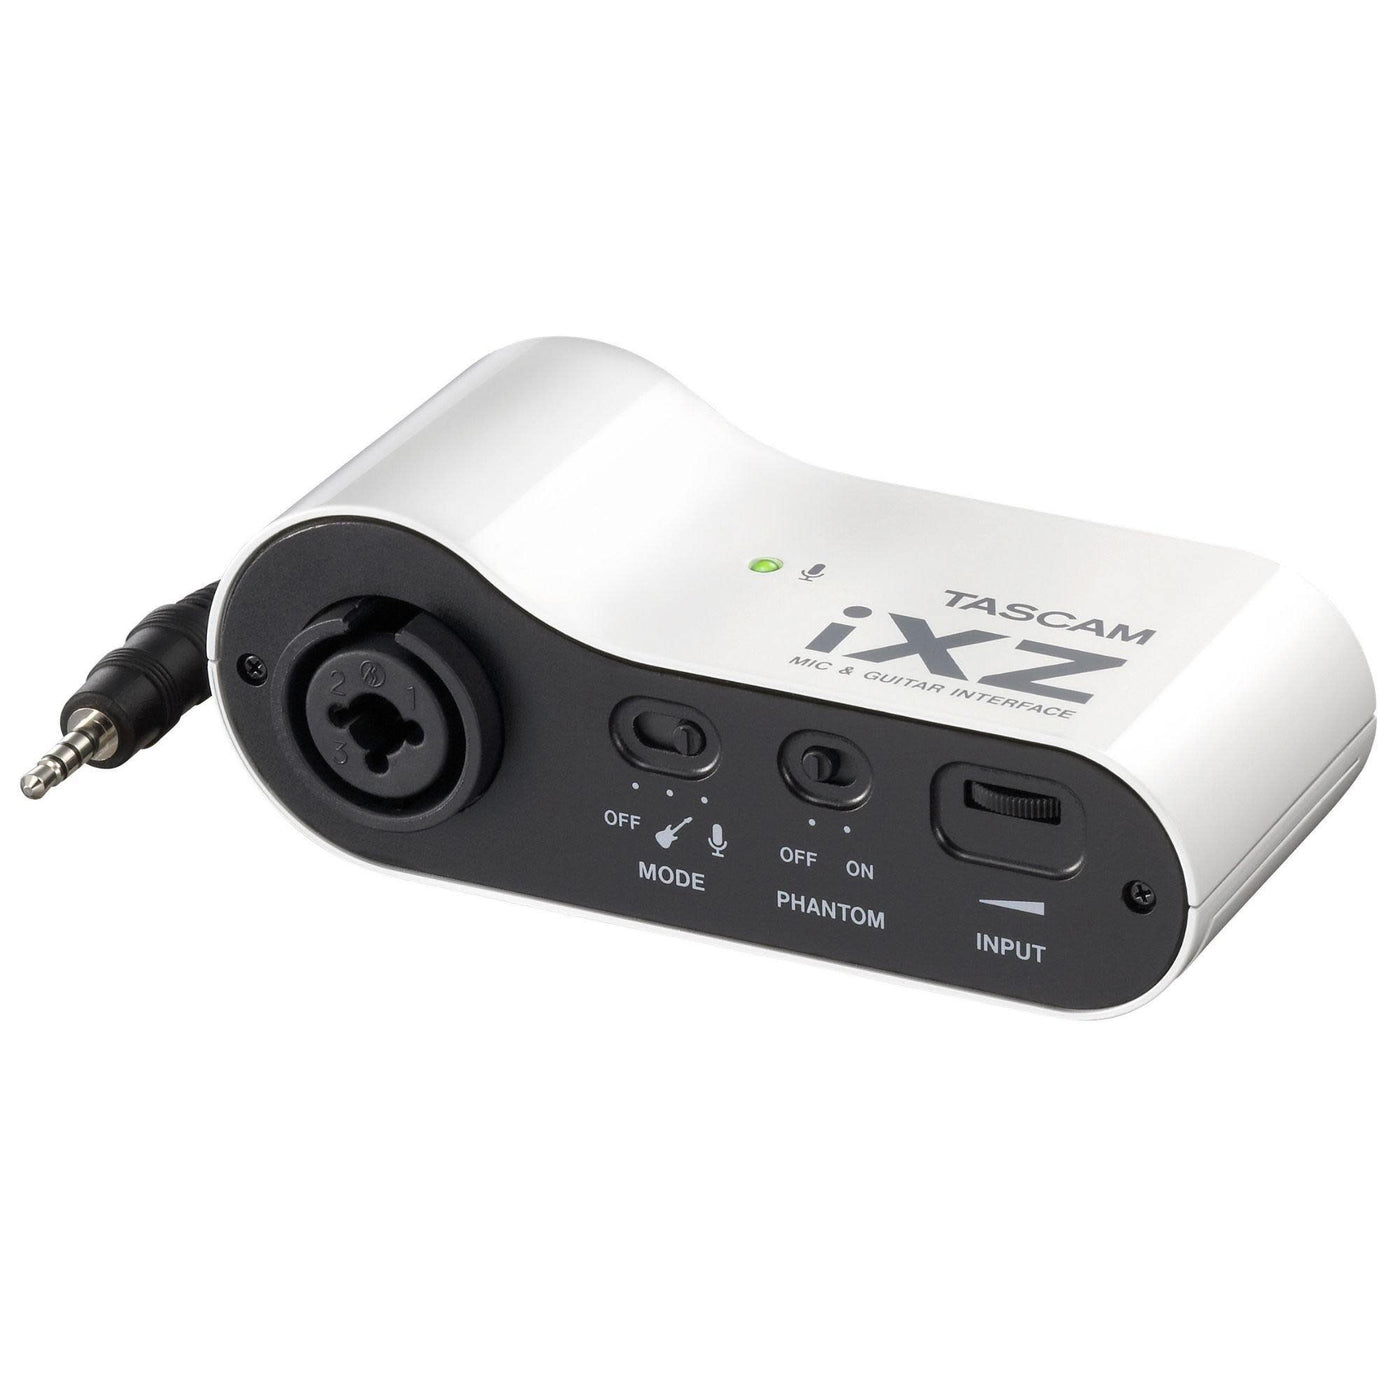 Tascam iXZ Audio Interface for iPad/iPhone/iPod Touch